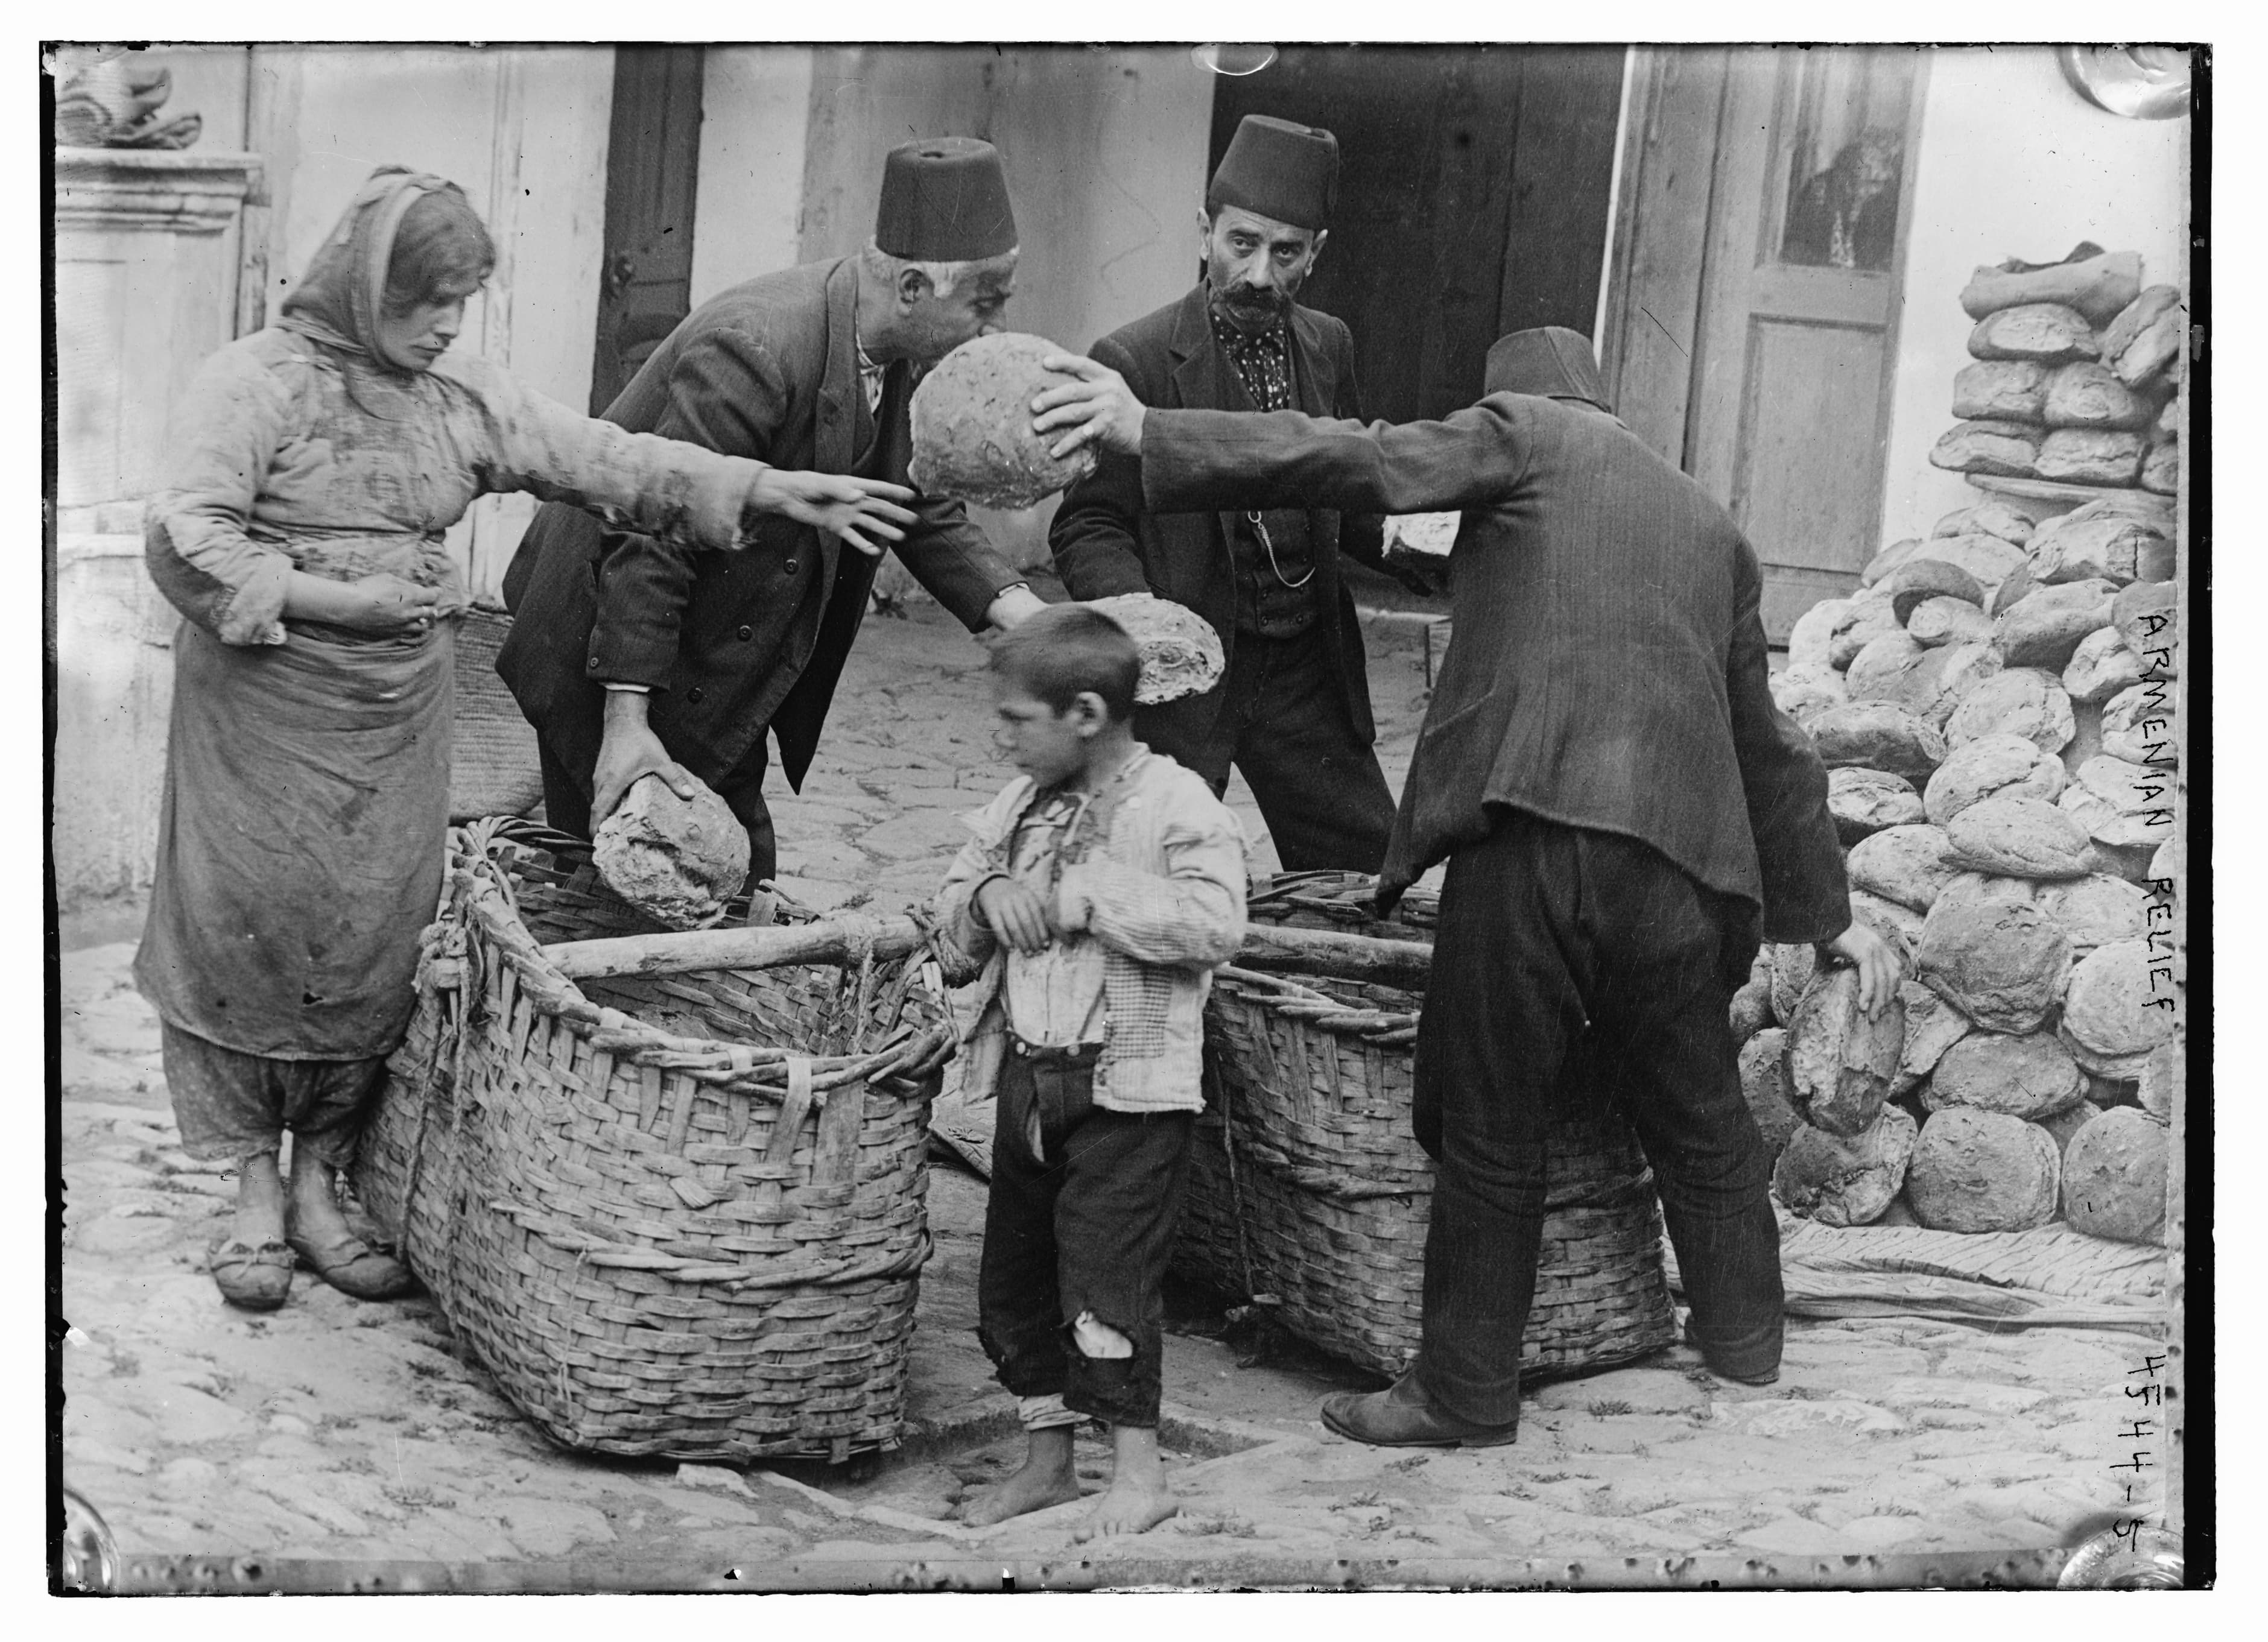 an-armenian-women-and-child-receiving-food-relief-during-the-armenian-genocide-ca-1915-16-photo-u1